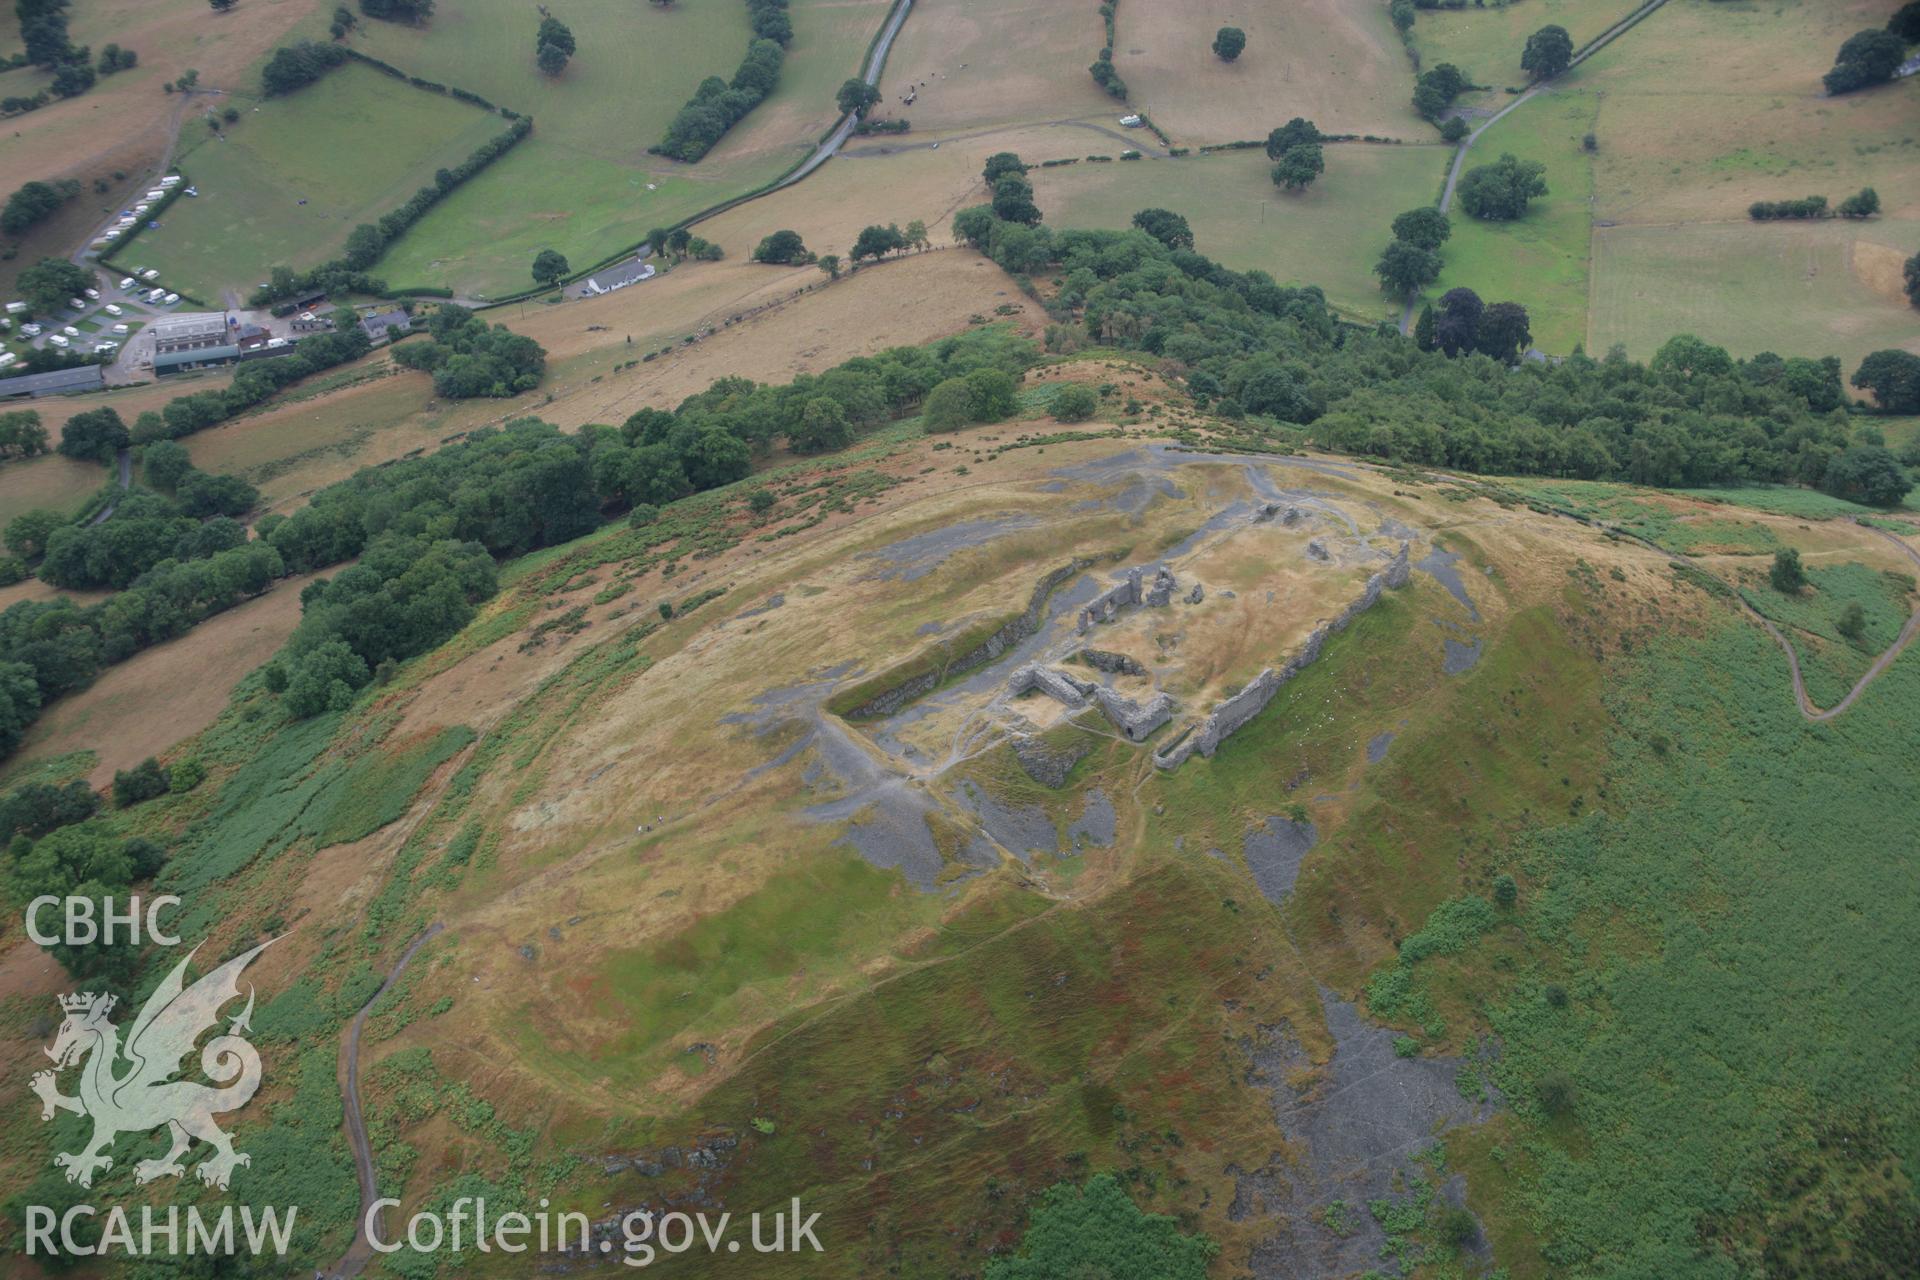 RCAHMW colour oblique aerial photograph of Castell Dinas Bran. Taken on 31 July 2006 by Toby Driver.